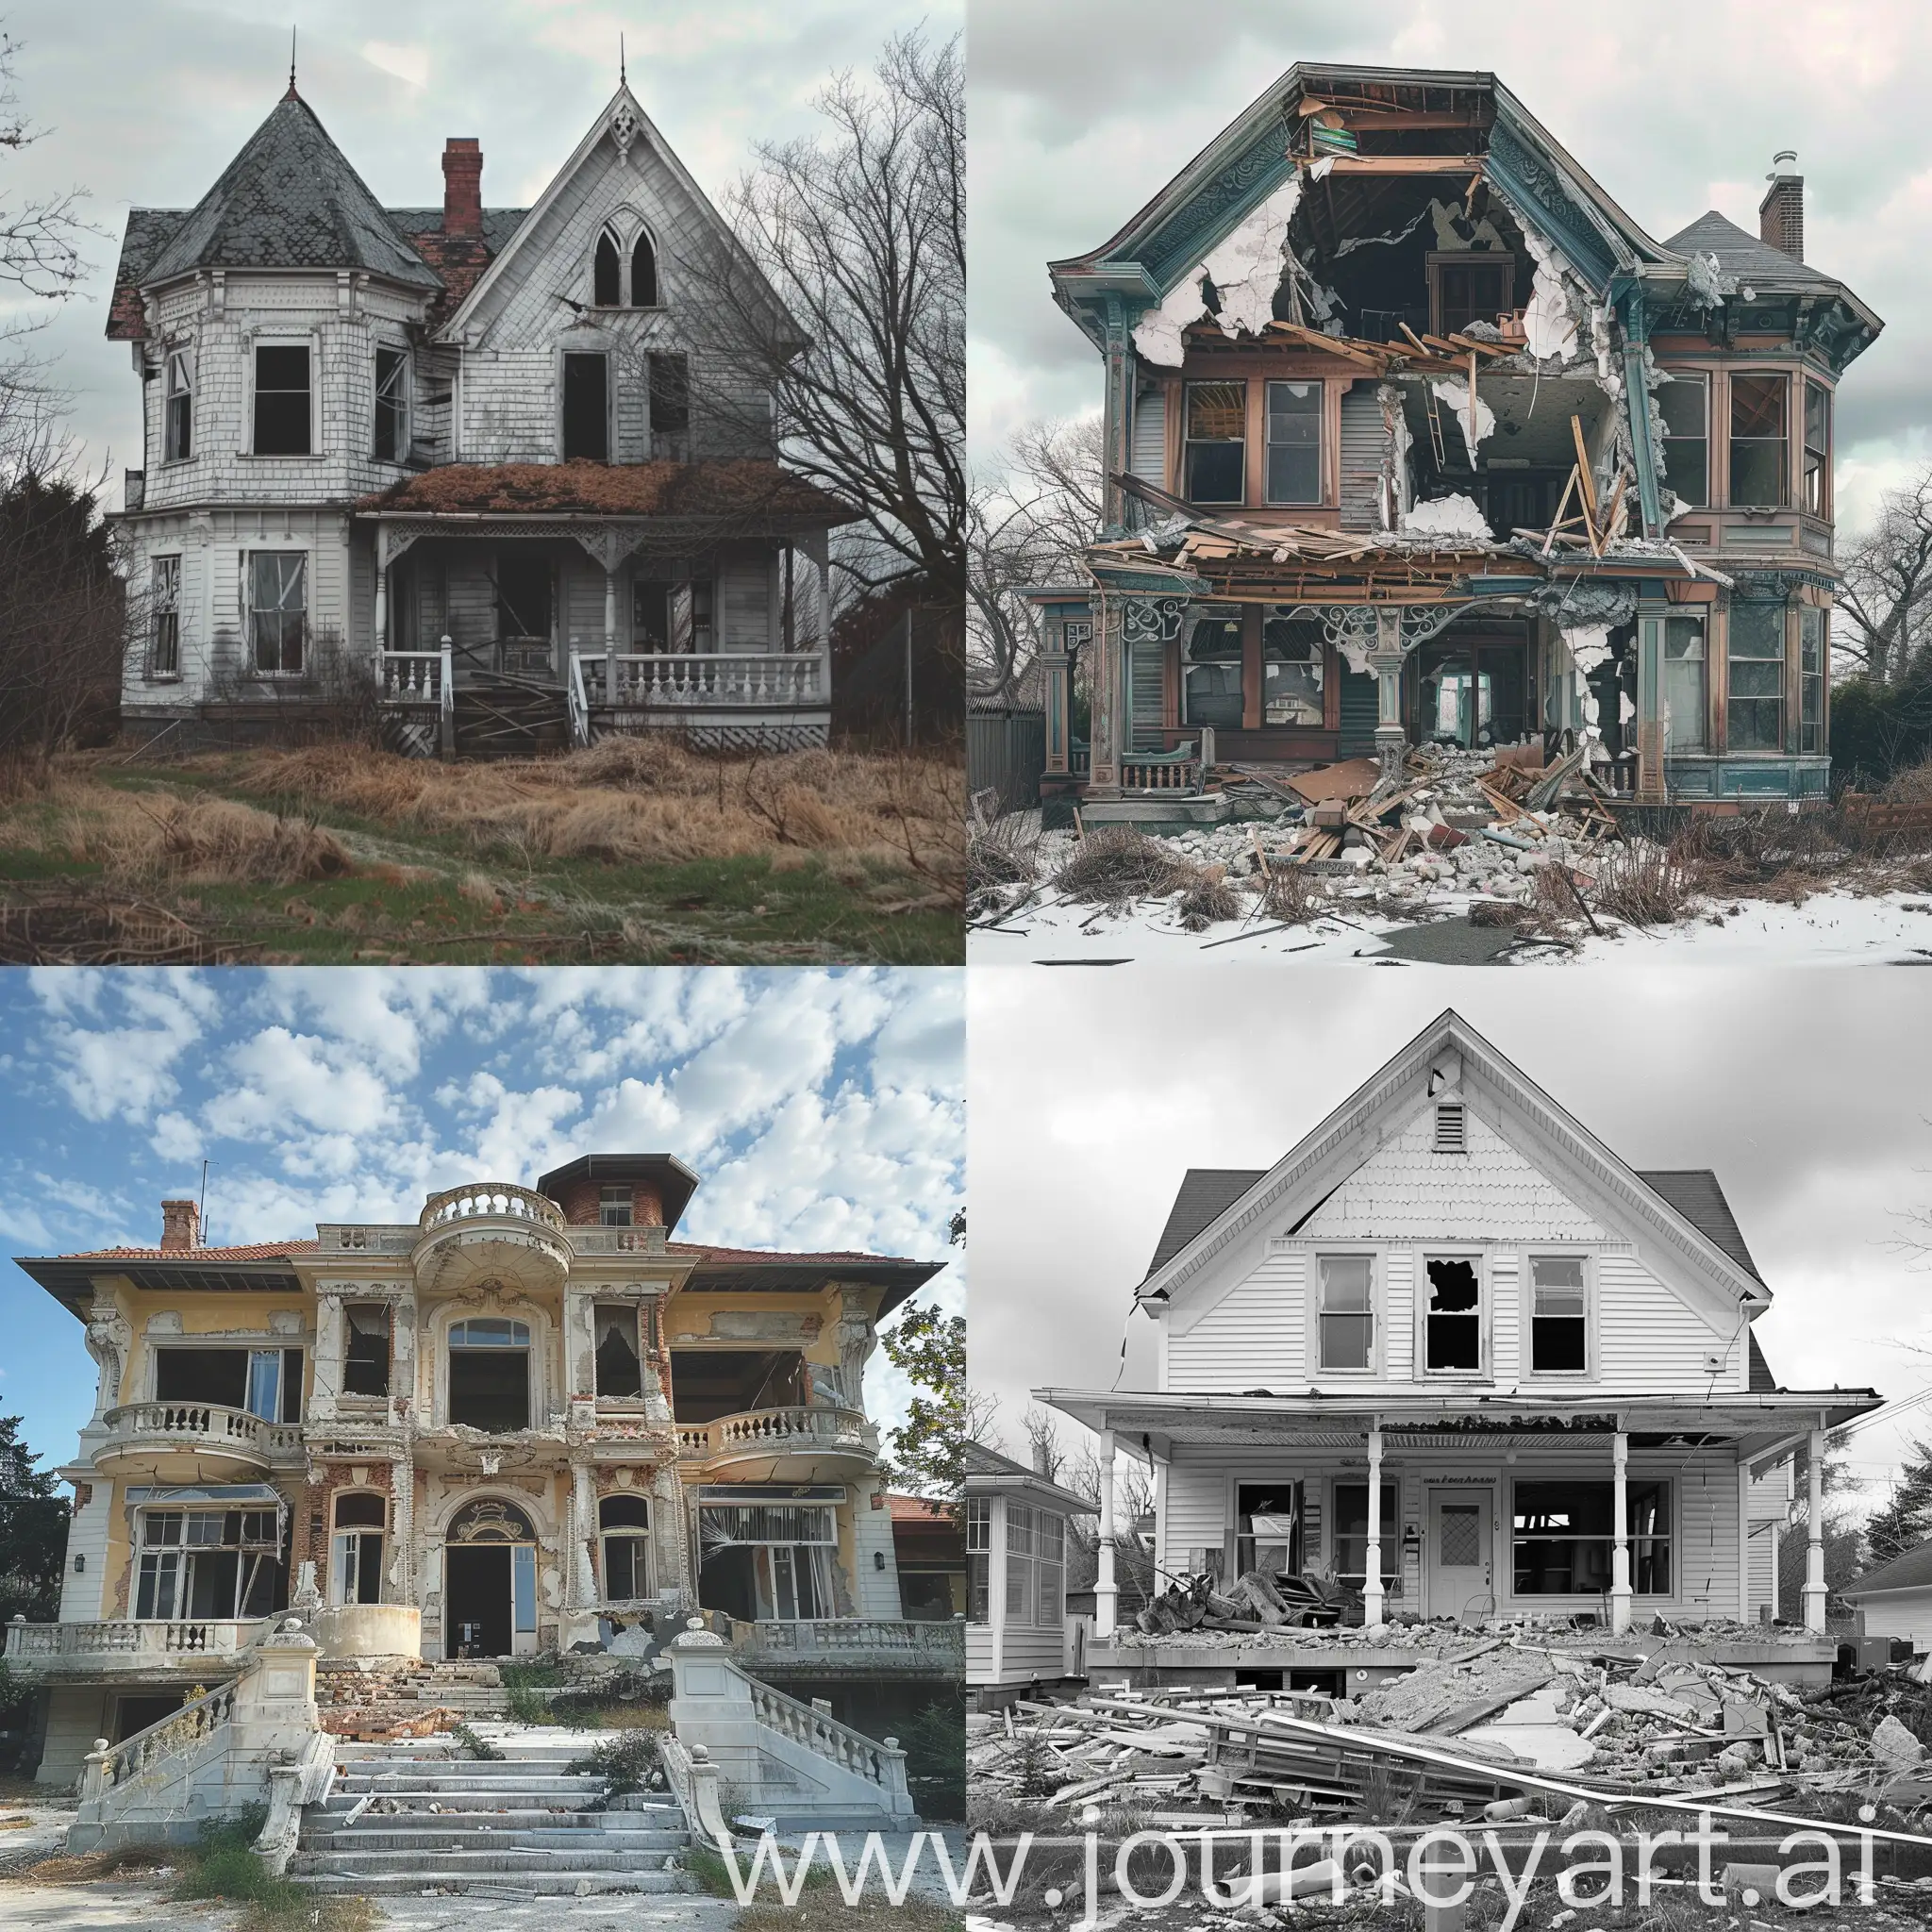 Abandoned-House-A-Tale-of-Exterior-Elegance-and-Interior-Decay